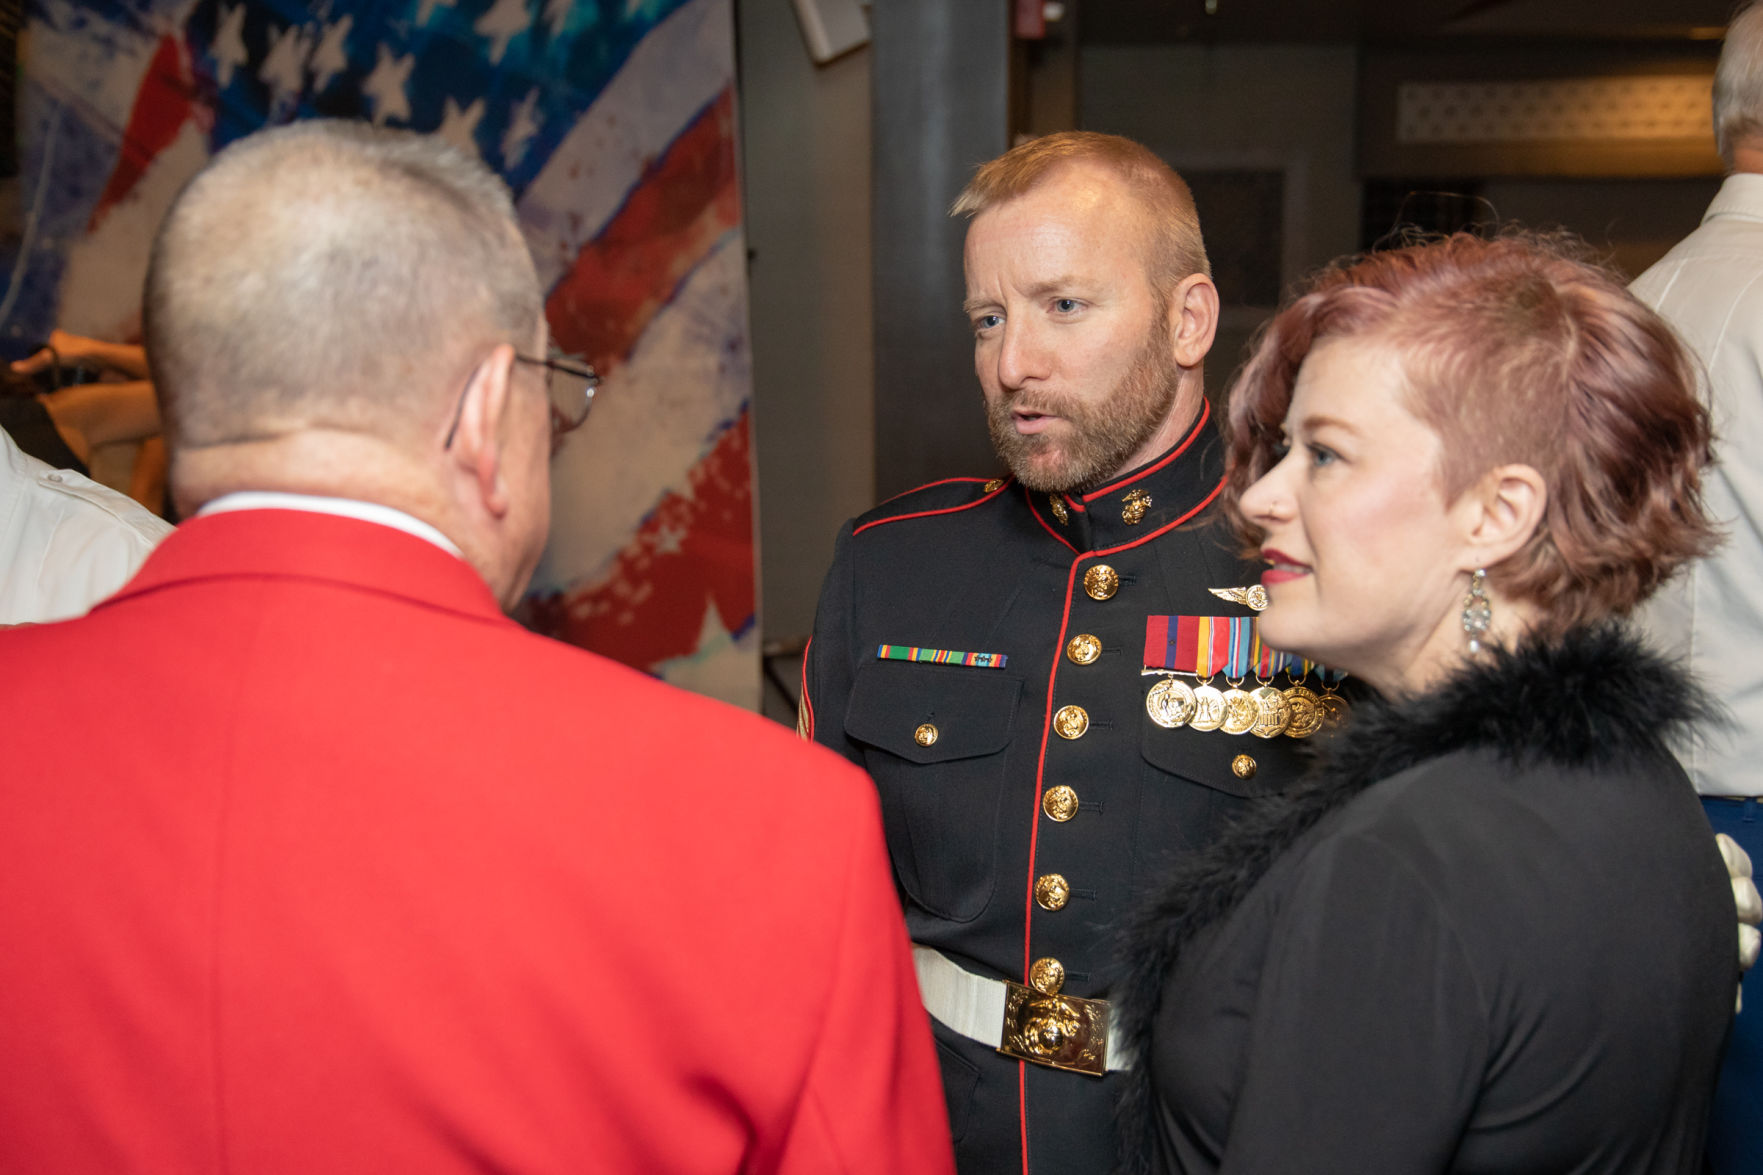 Military Ball Do's and Don'ts from a Seasoned Spouse